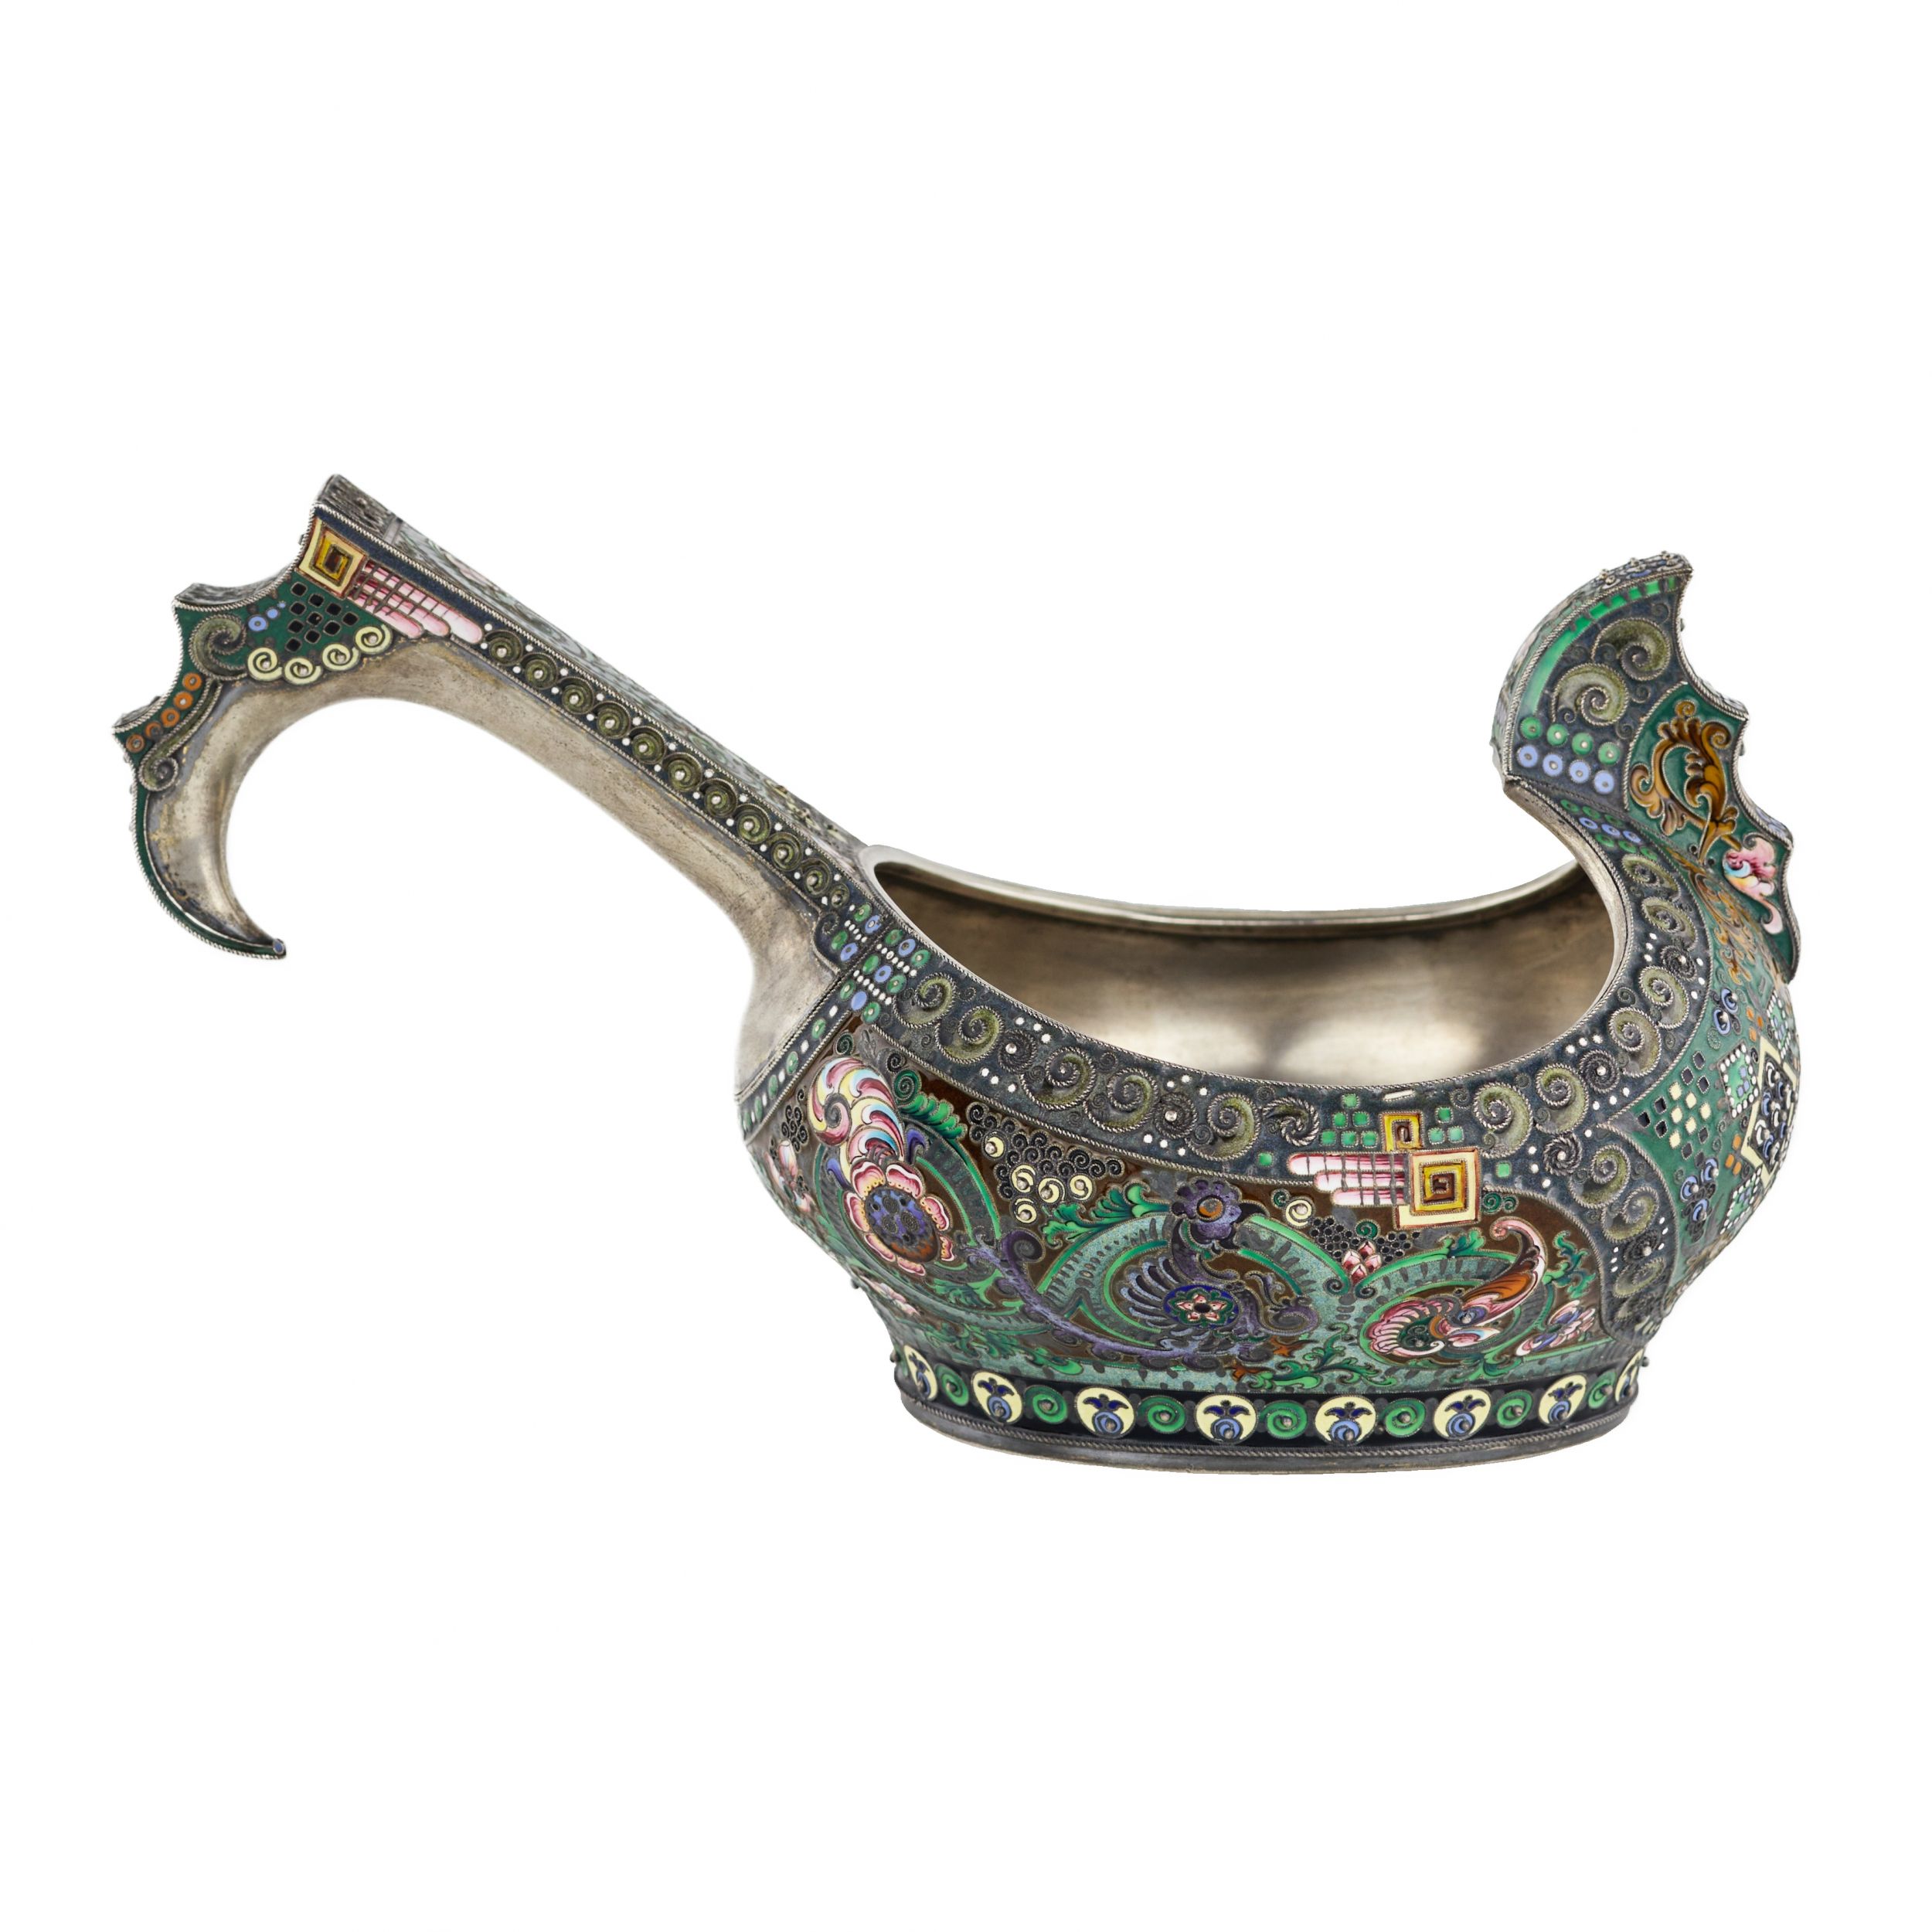 A-graceful-silver-ladle-in-the-Russian-Art-Nouveau-style-of-the-11th-Moscow-artel-Early-20th-century